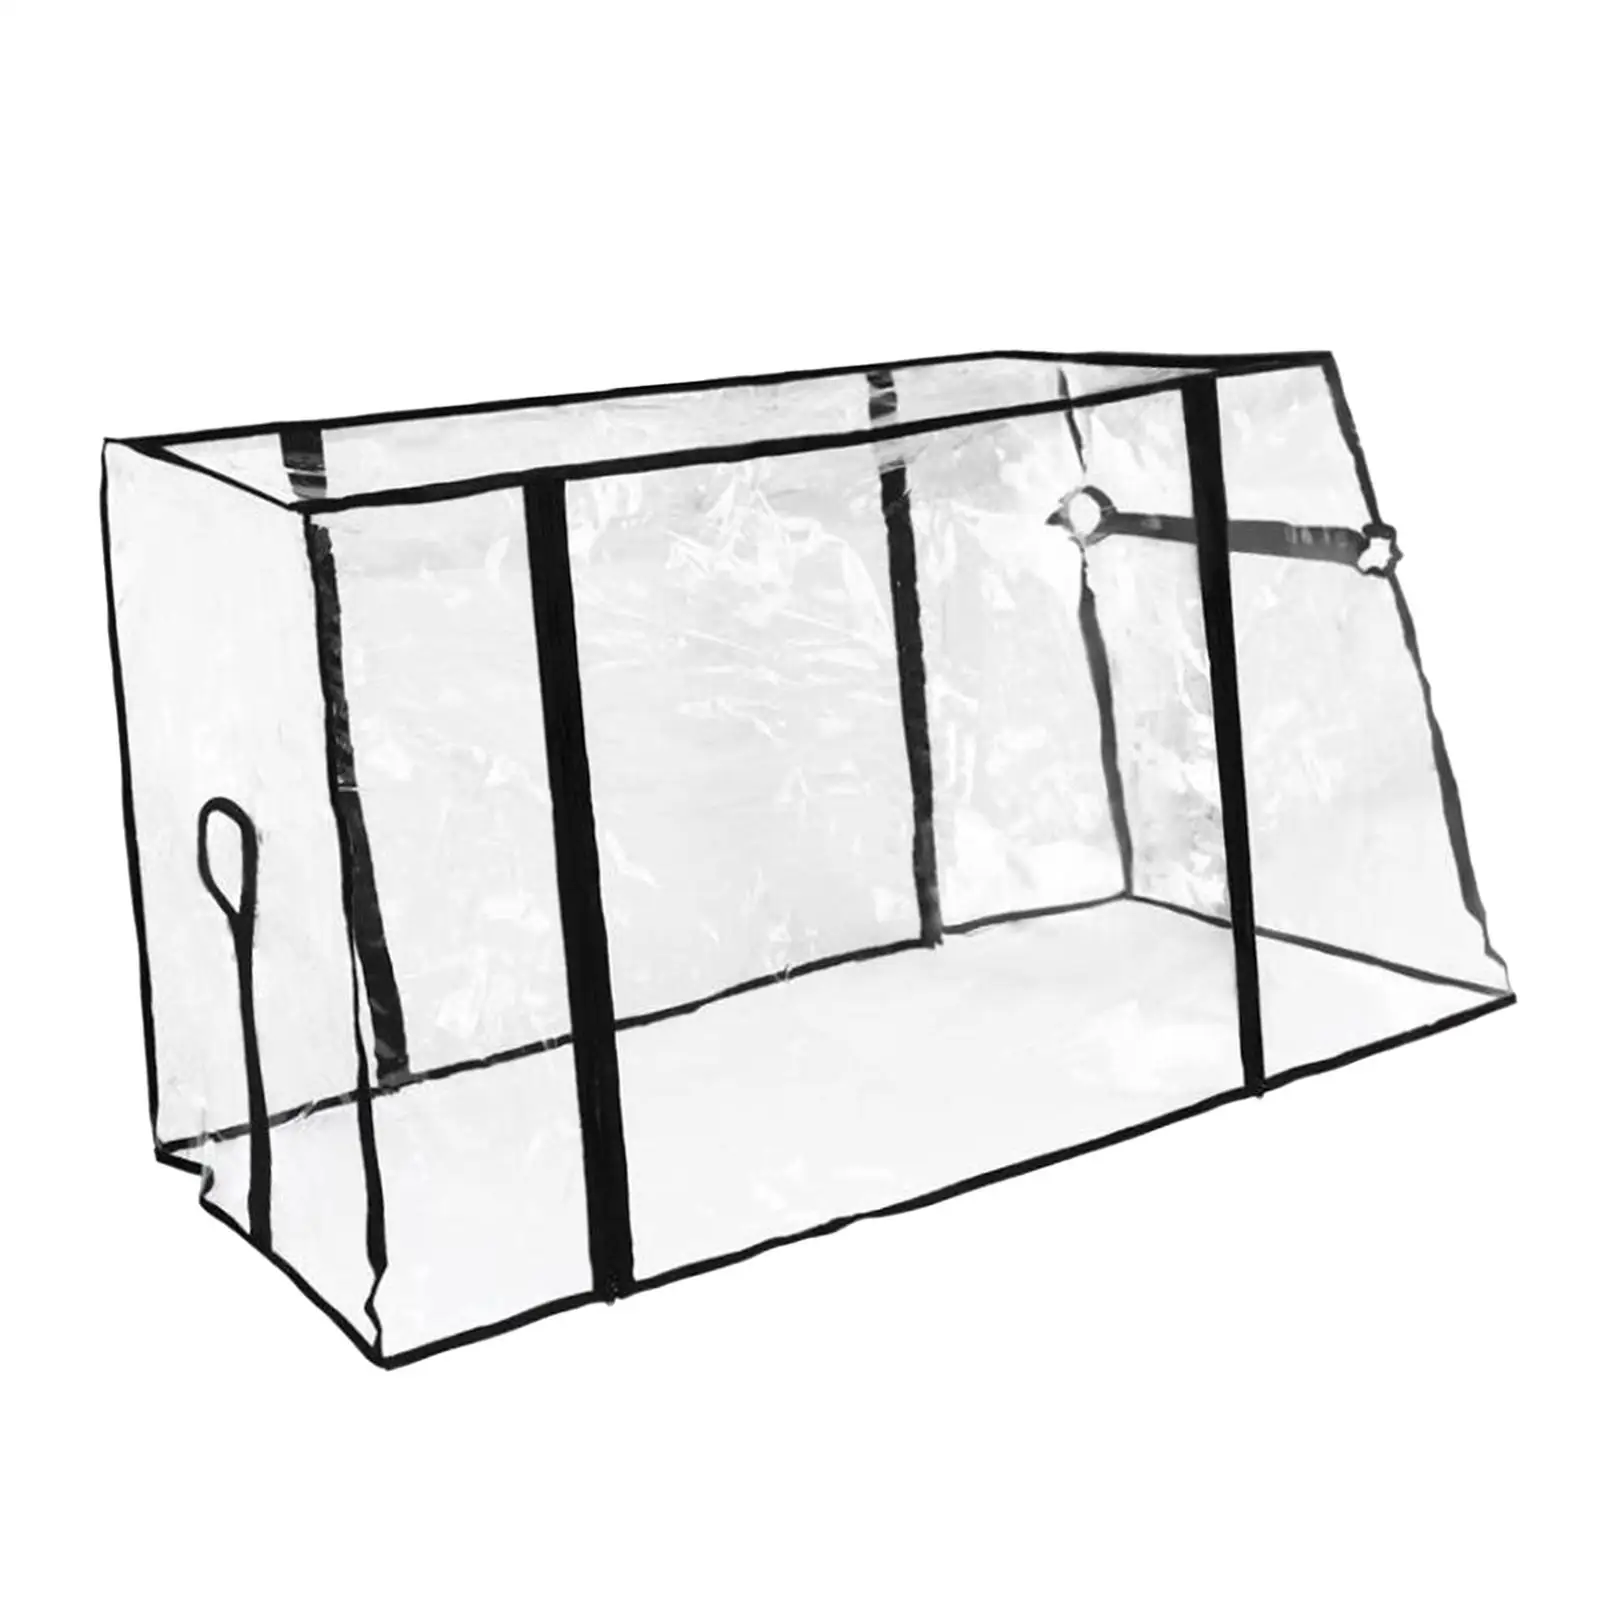 Push Pull Wagon Rain Cover Clear Trolley Cart Cover Easily Install 33x15.7x27.6inch Rainproof Windproof Transparent for Shopping